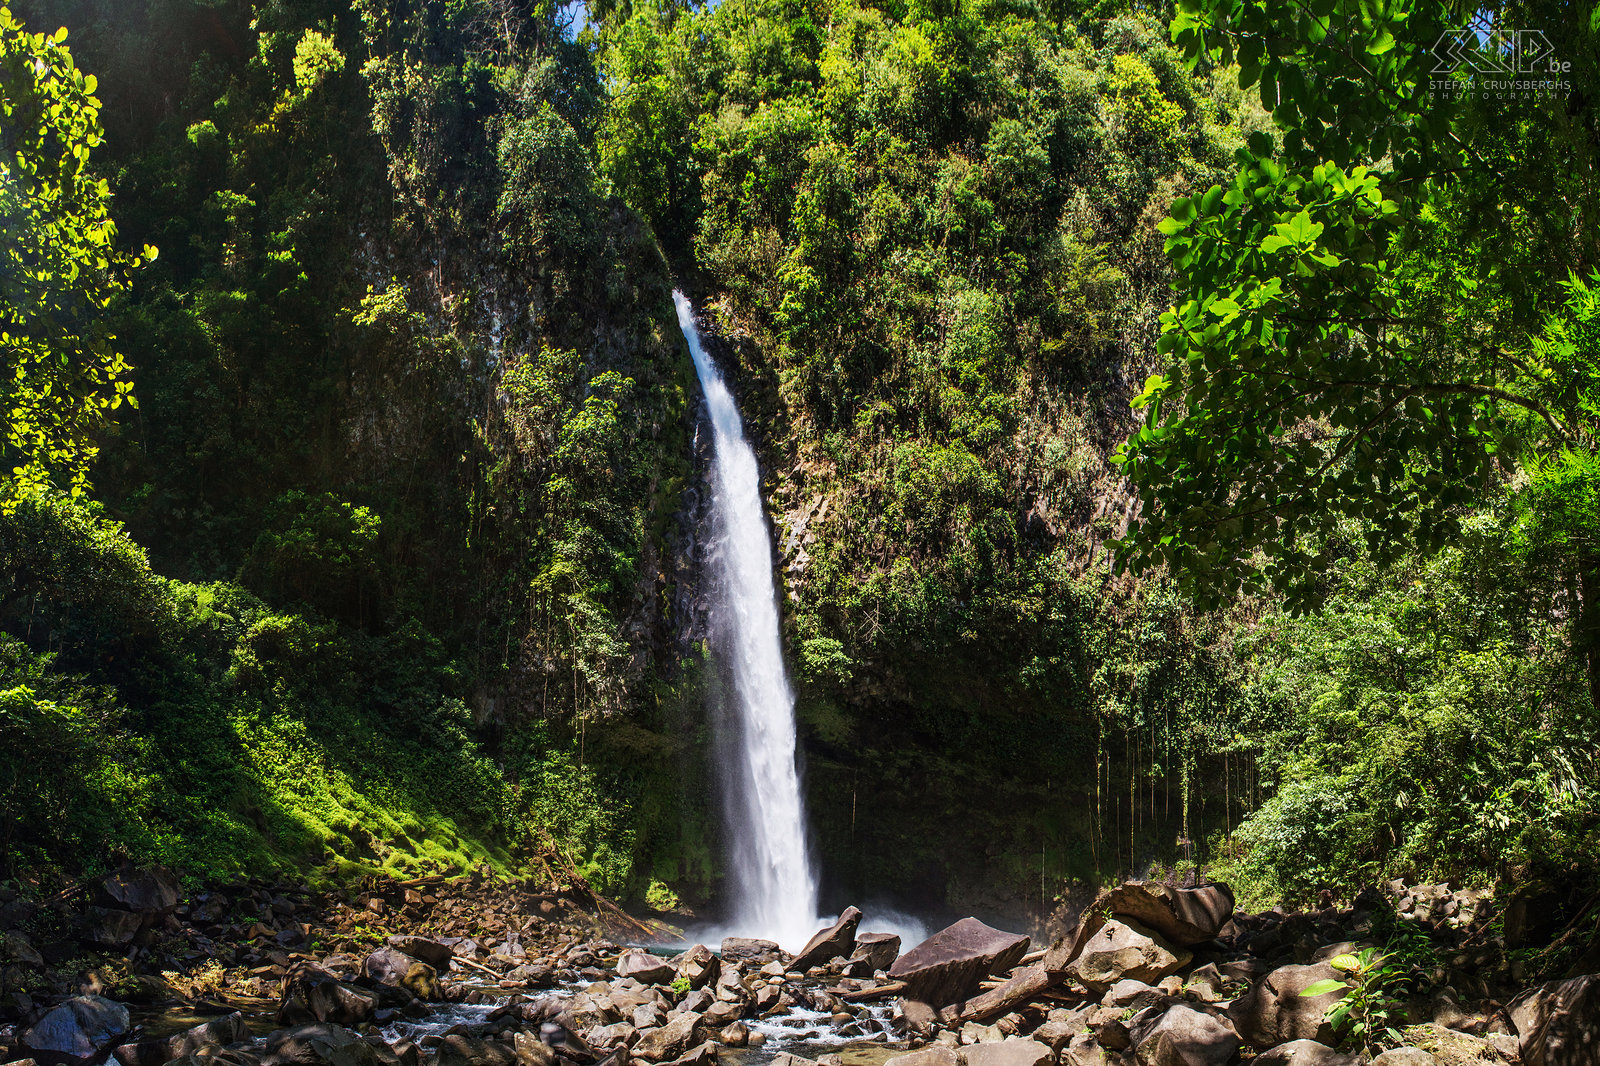 La Fortuna waterfall La Fortuna Waterfall is located near the city of La Fortuna near the Arenal volcano. The waterfall emerges from dense jungle before plummeting some 65m into an emerald pool below. Stefan Cruysberghs